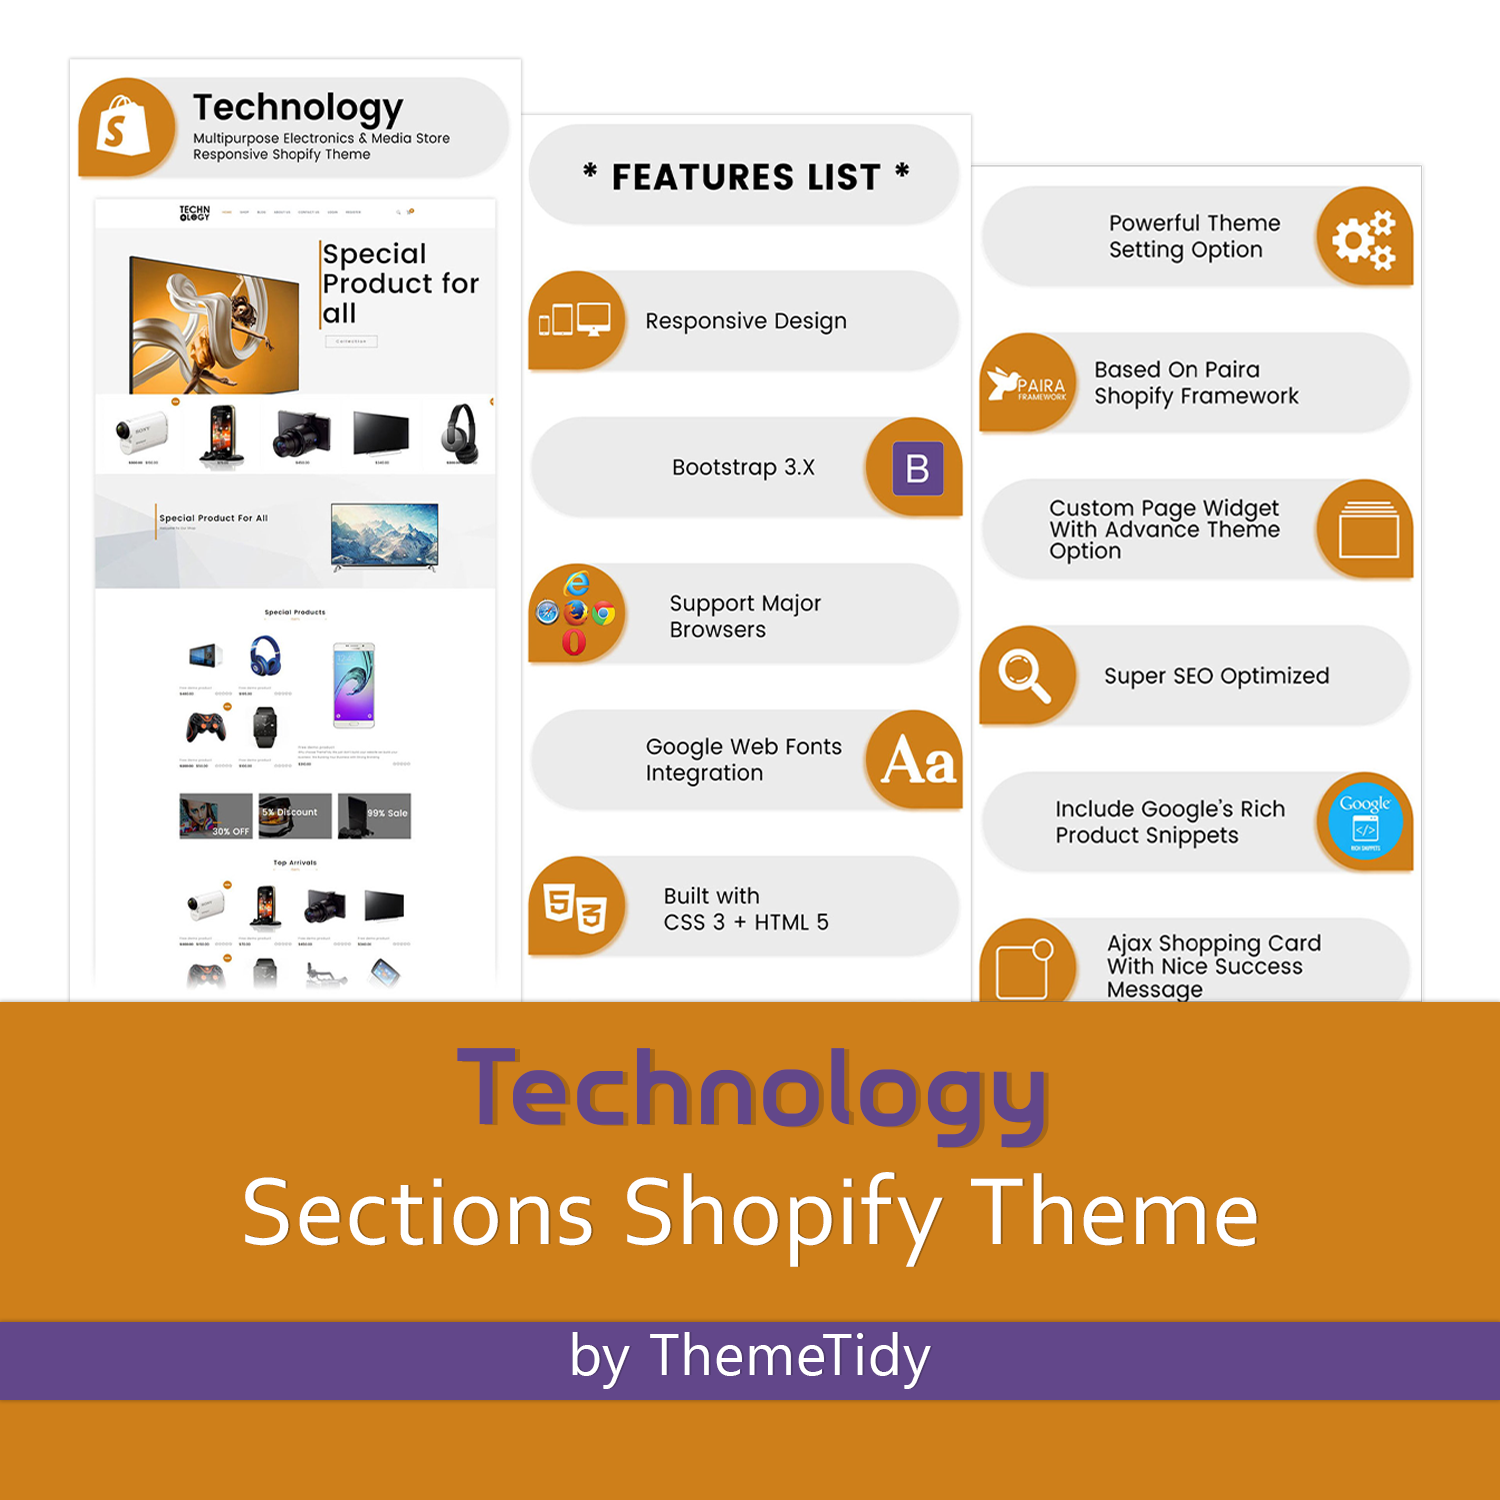 Preview technology sections shopify theme.